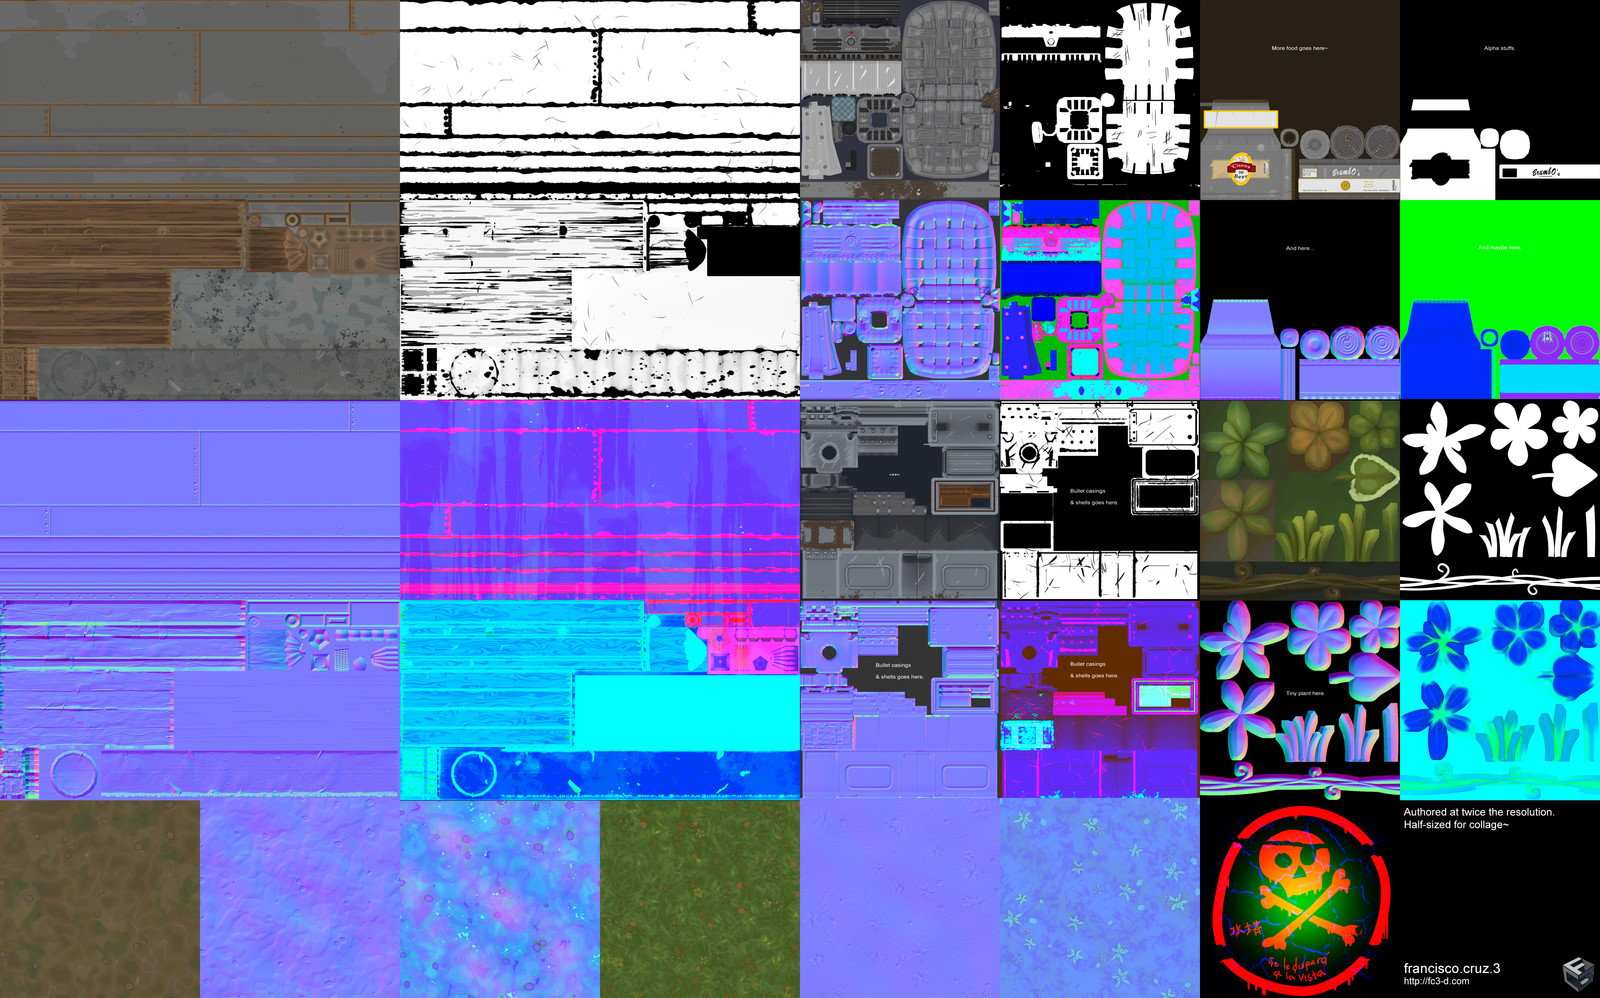 Collage of textures used. Main tower textures at 1024 x 1024 x 3 (Base color + mask in its alpha channel, normal, &amp; RGB pack to control metal, roughness, and ambient occlusion). Props using a 512 x 512 x 3.